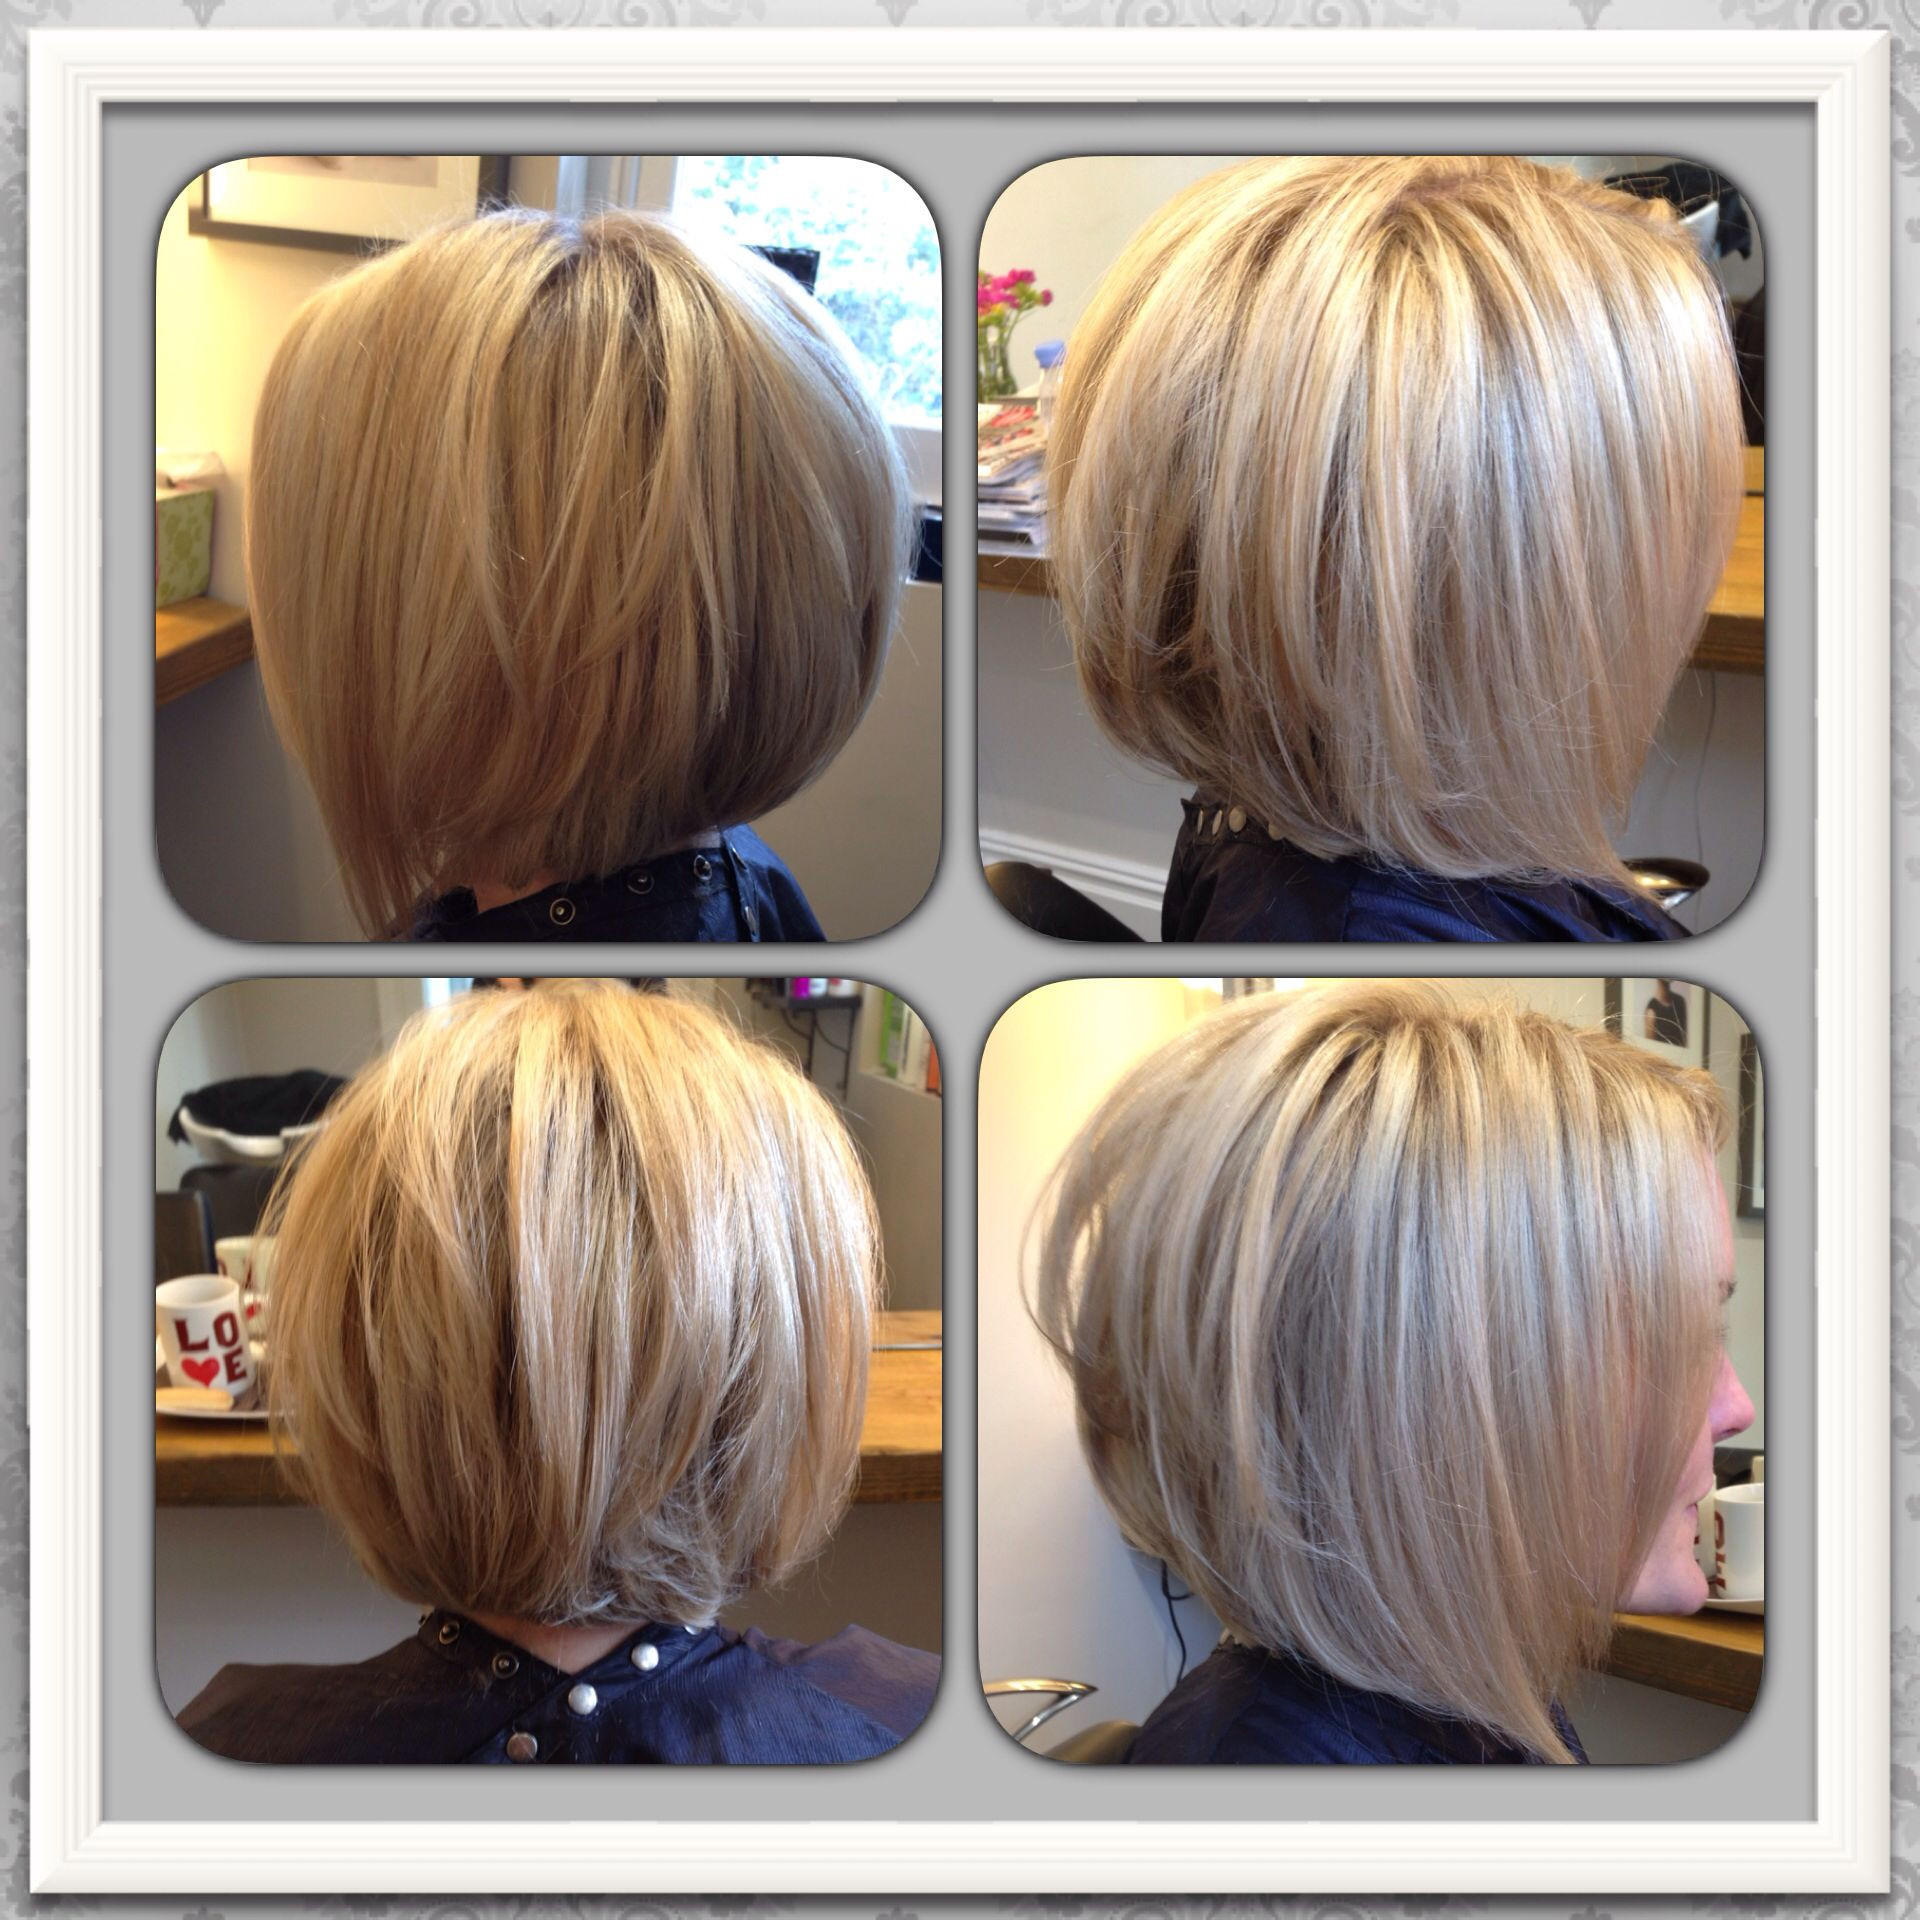 Graduated Bob Hairstyles Back View
 Love my new hair Blonde highlighted inverted graduated